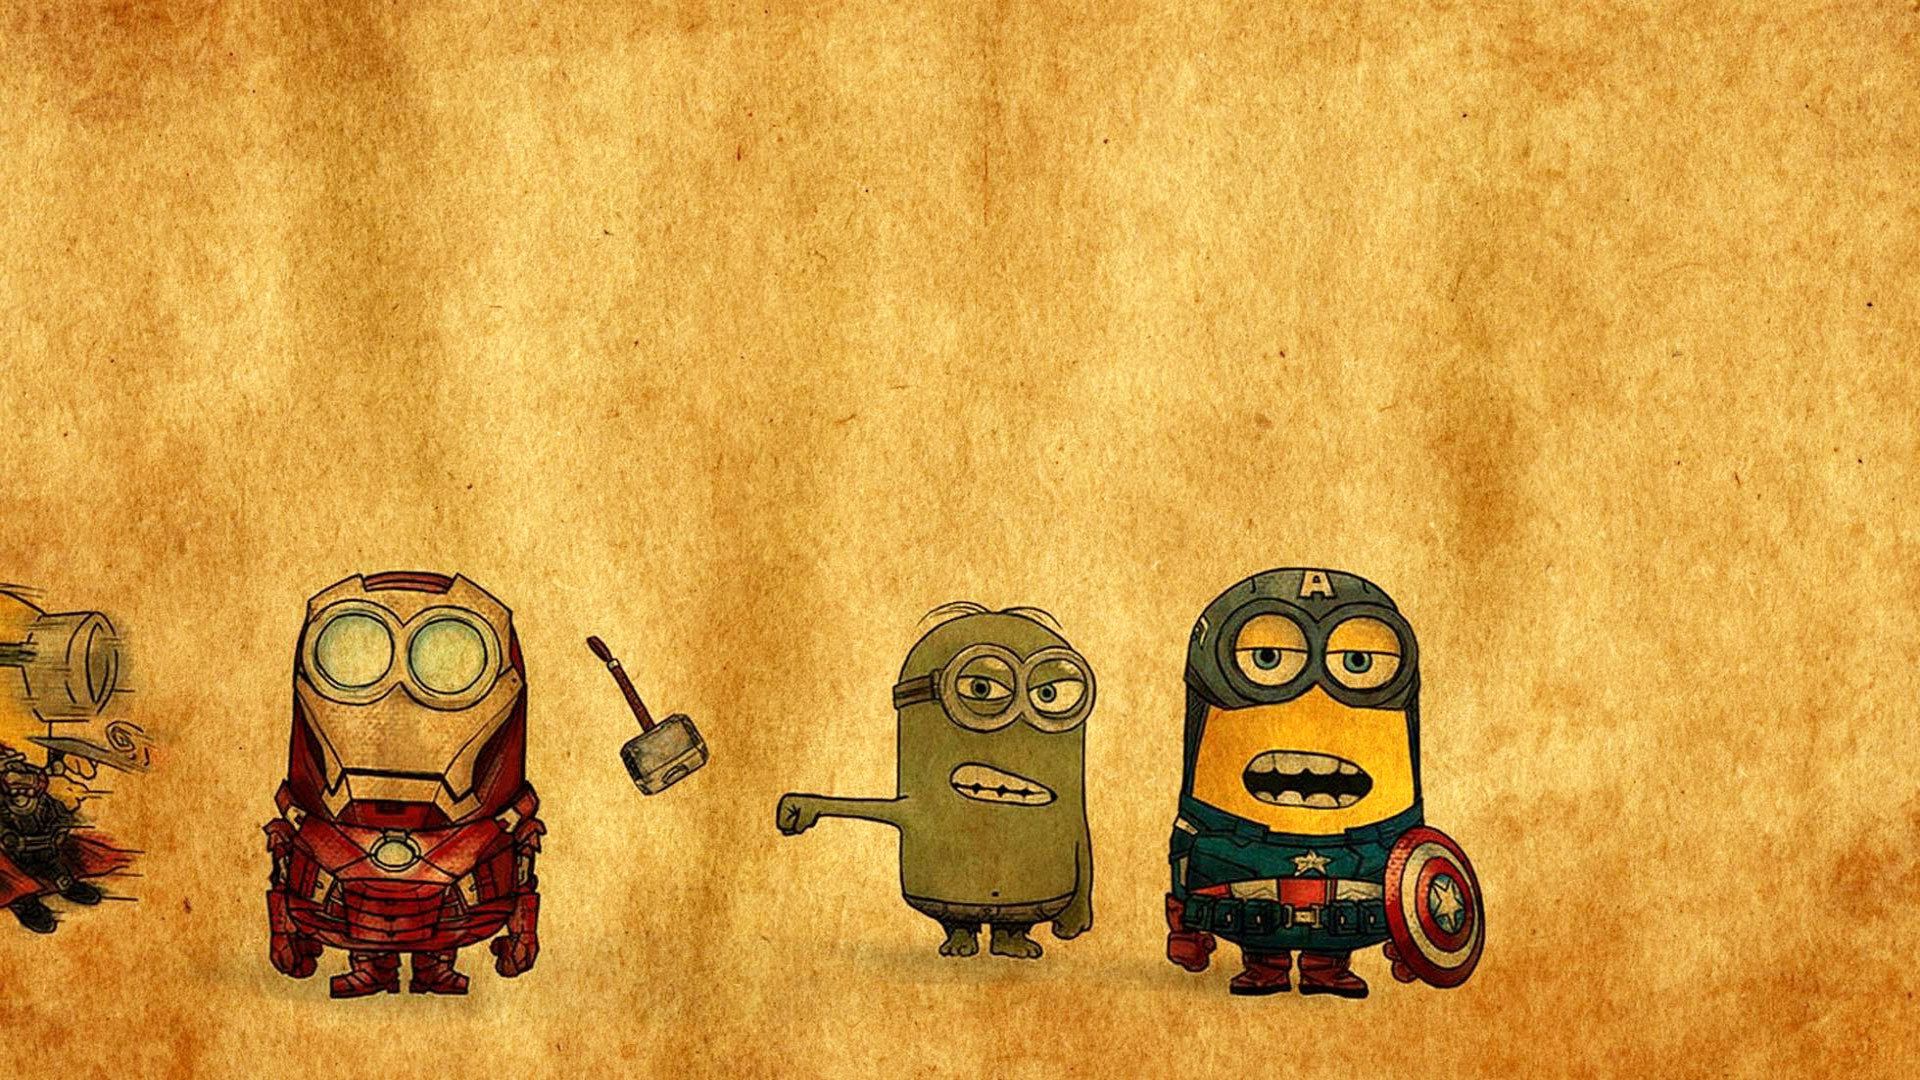 Minions superheroes wallpapers and images - wallpapers, pictures ...